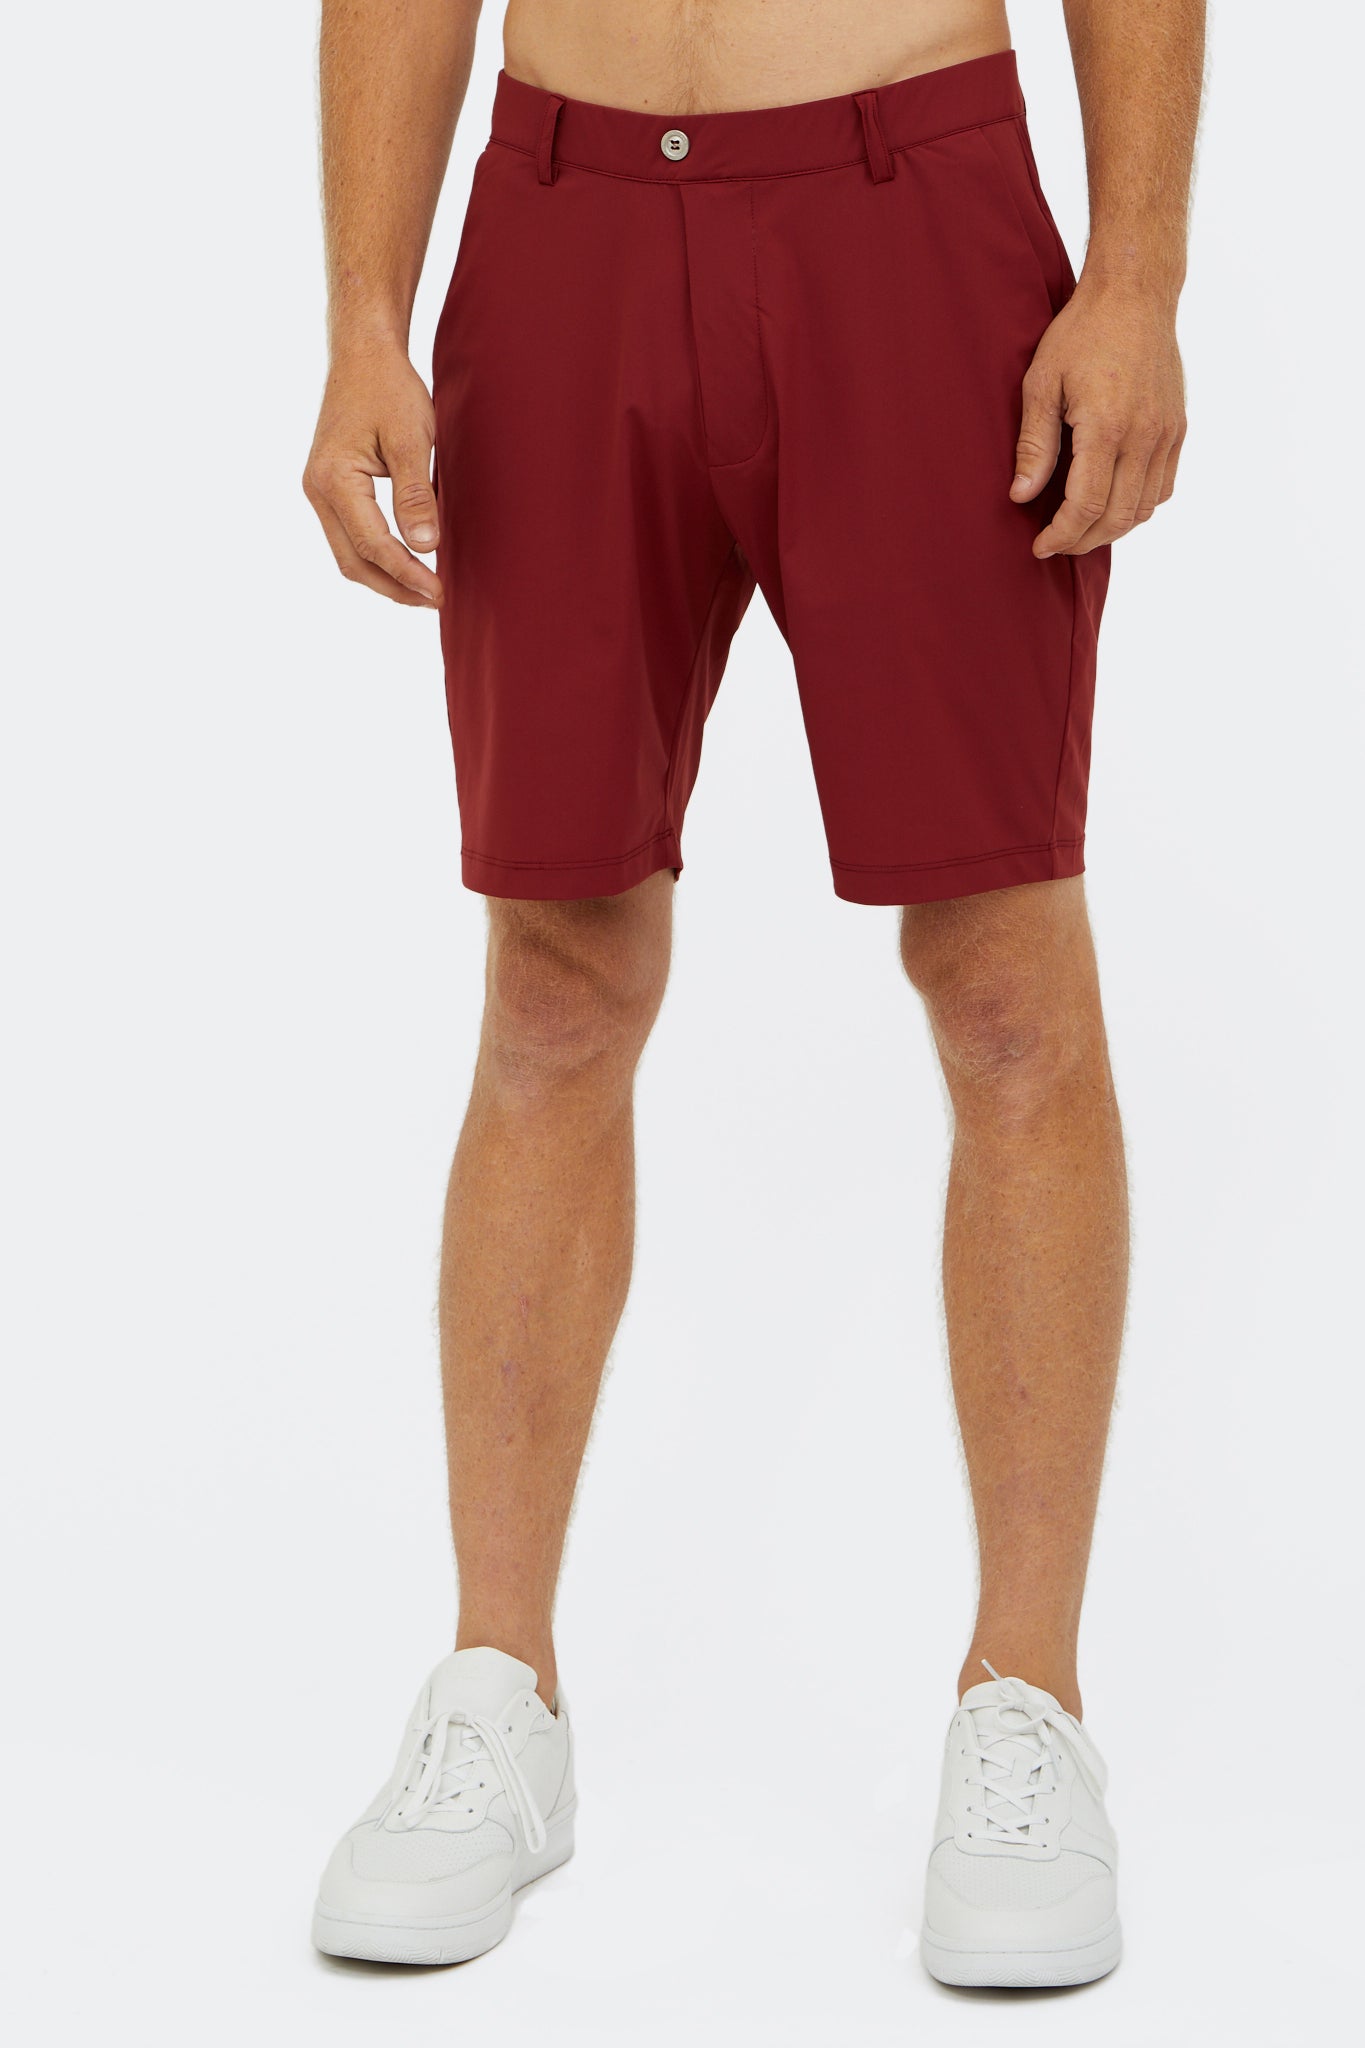 Image of the hanover pull-on short in maroon